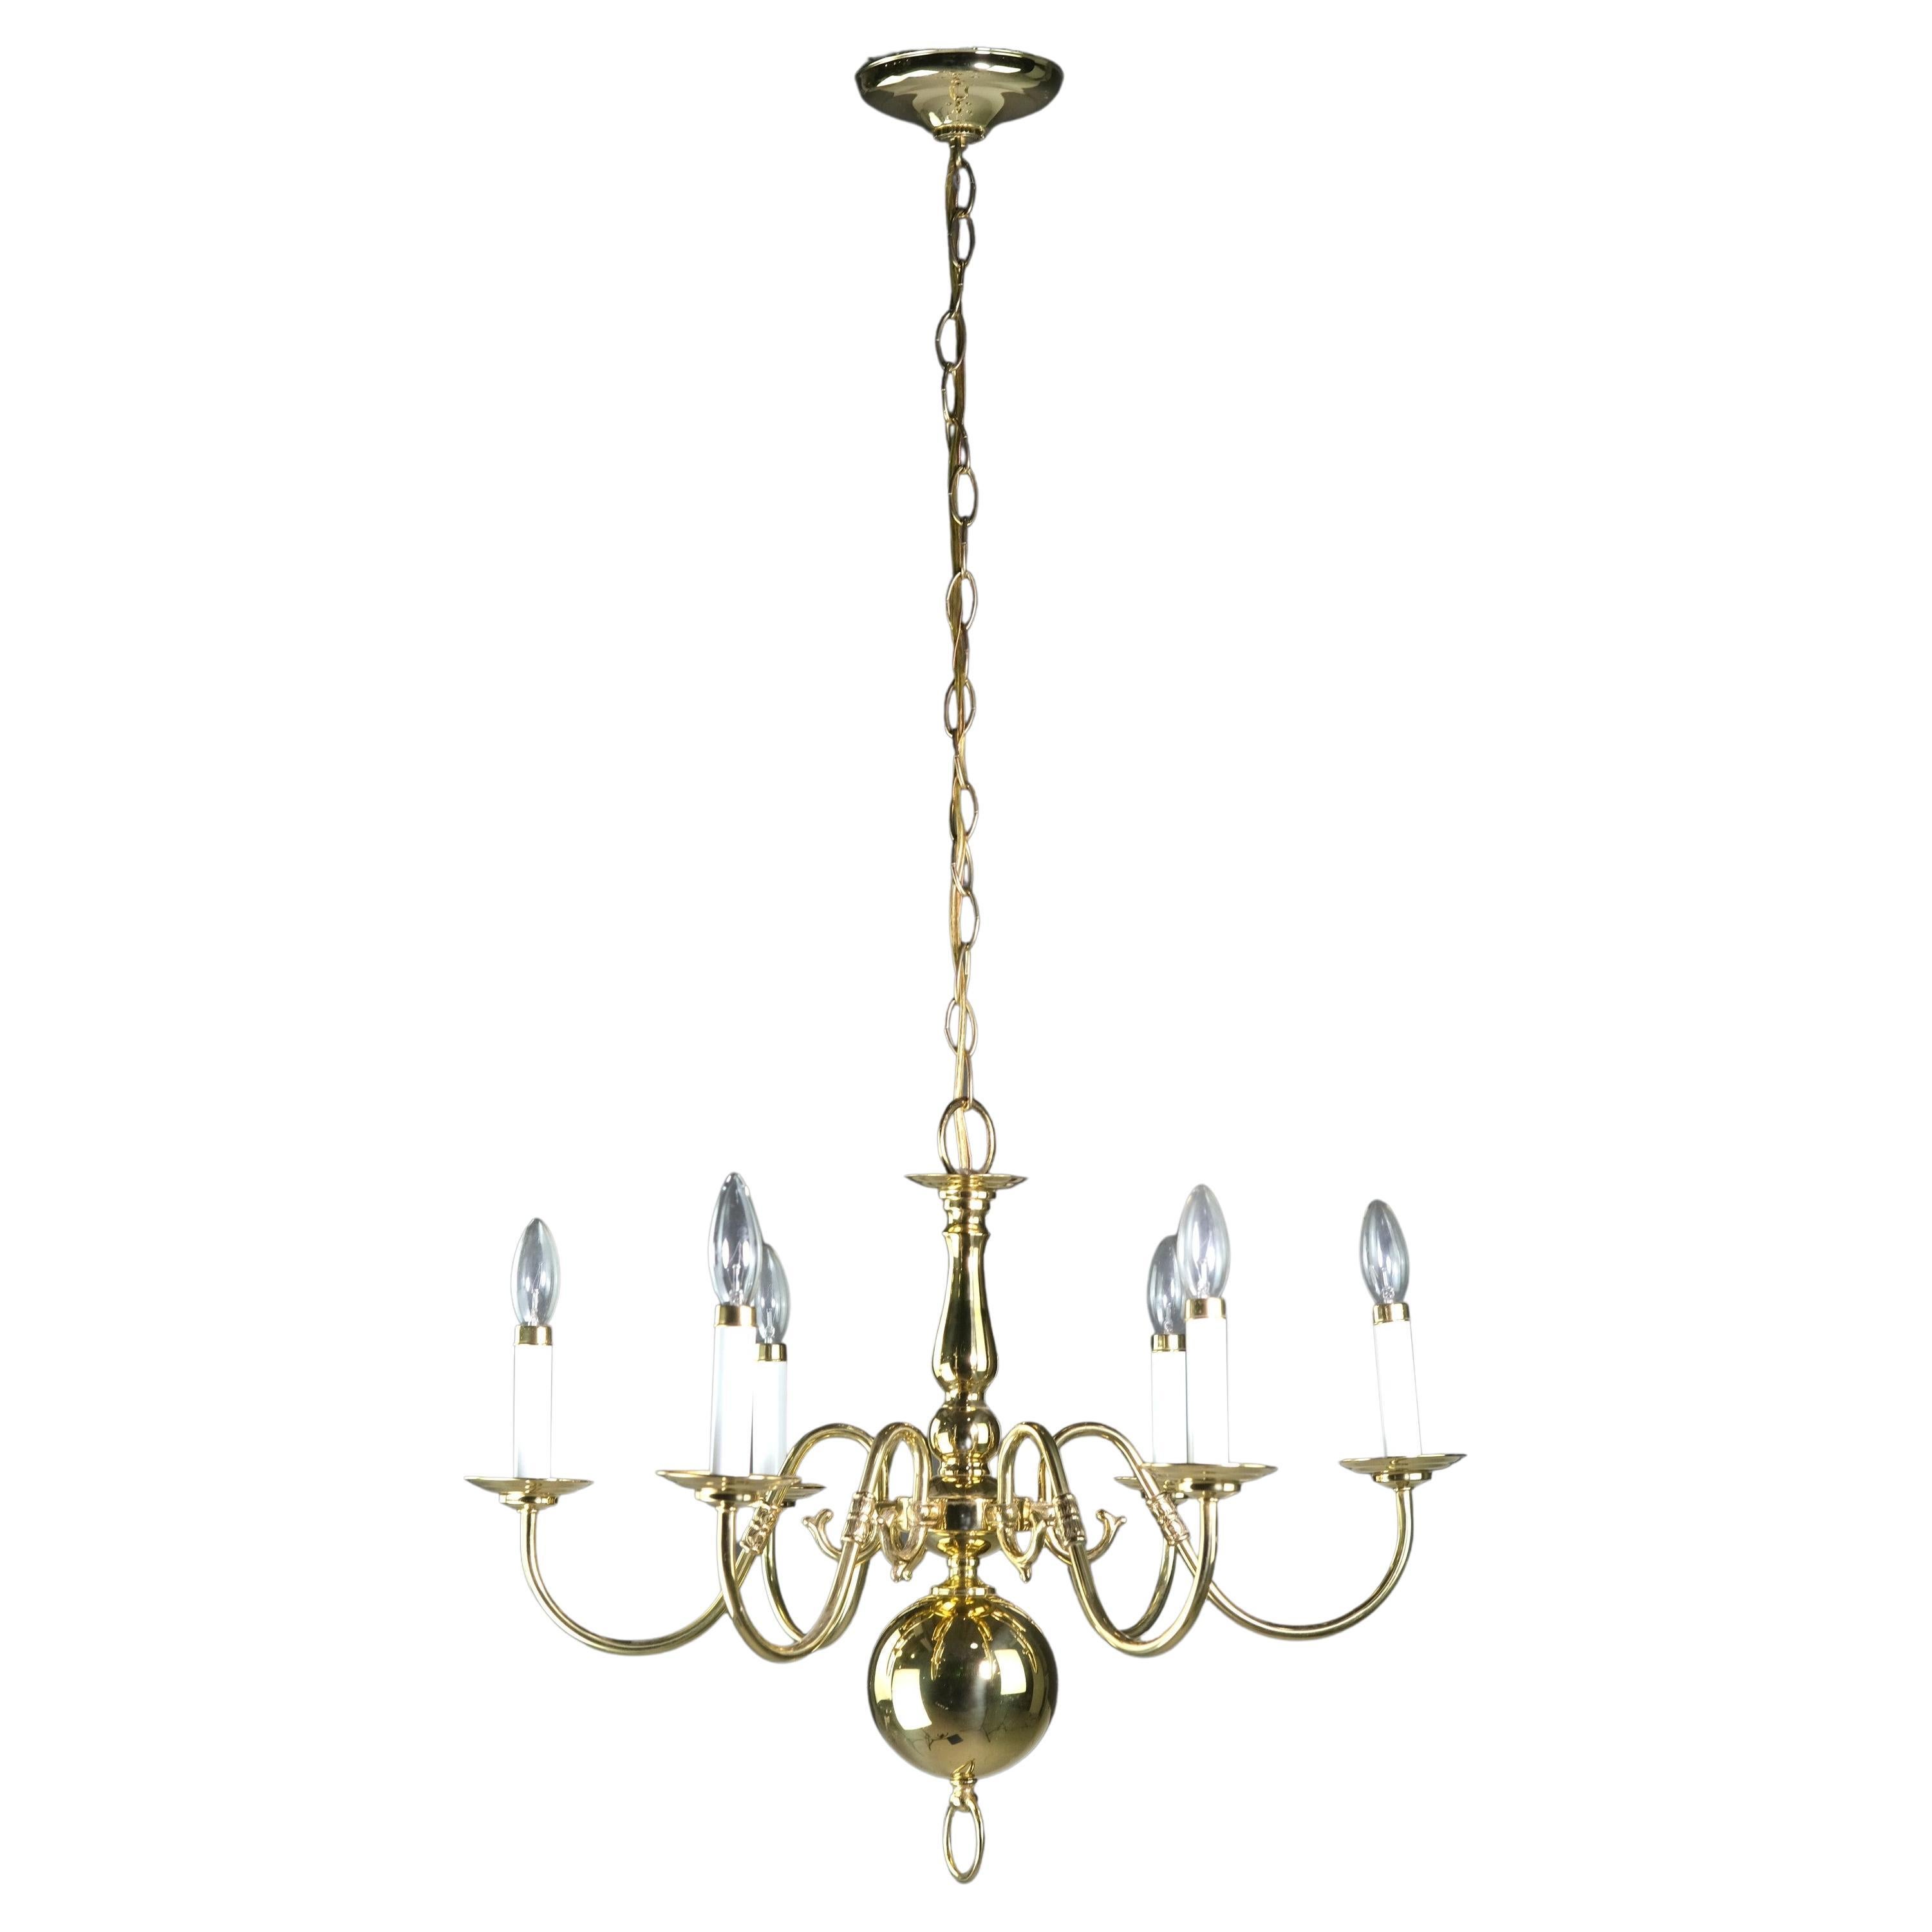 Restored Williamsburg Style Polished Brass Chandelier 6 Arms For Sale